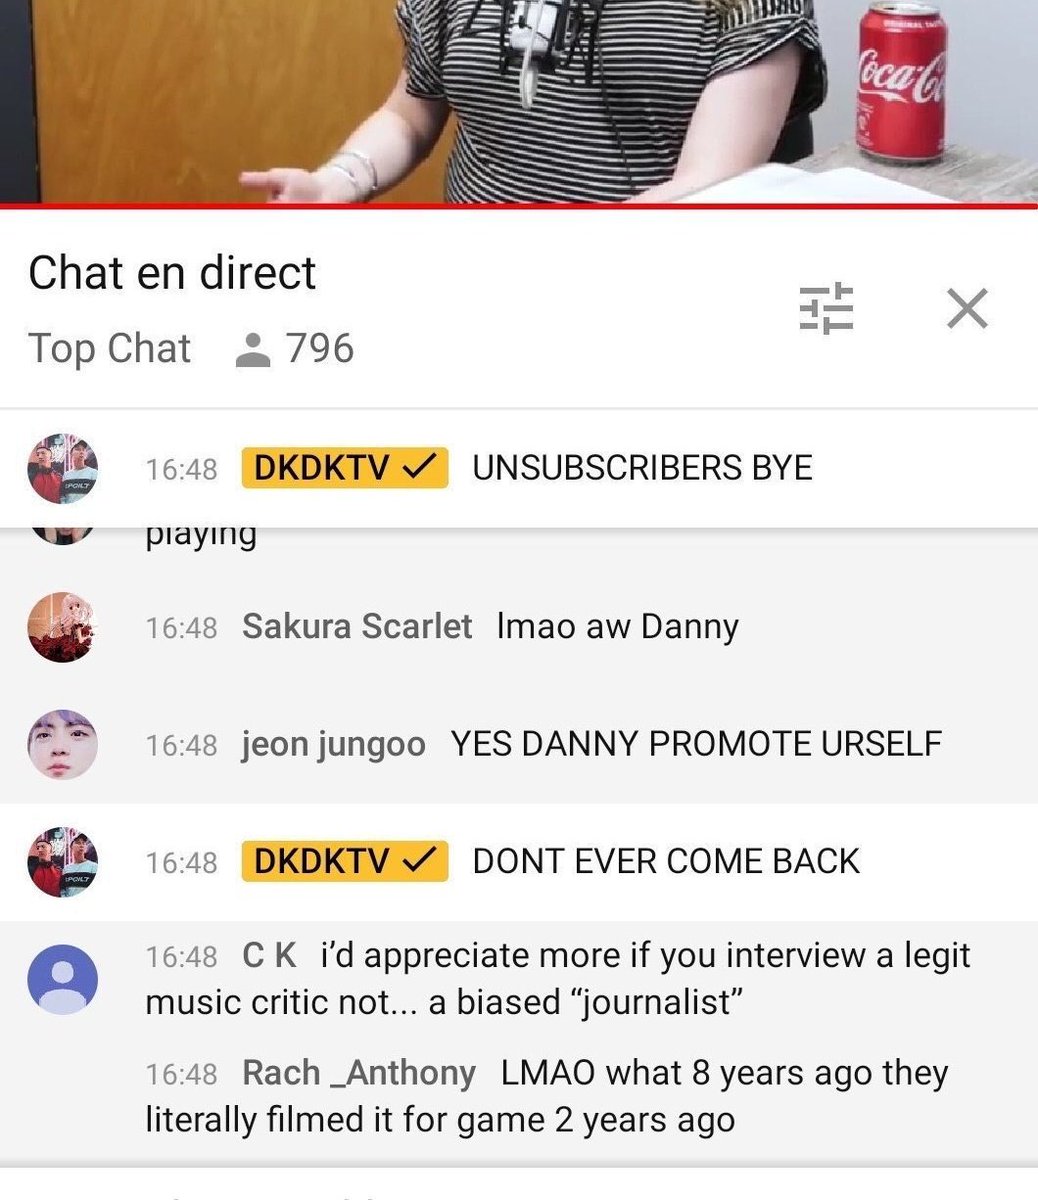 While this was unfolding Danny was actually replying to live comments and here's a taste of how he handled criticism.